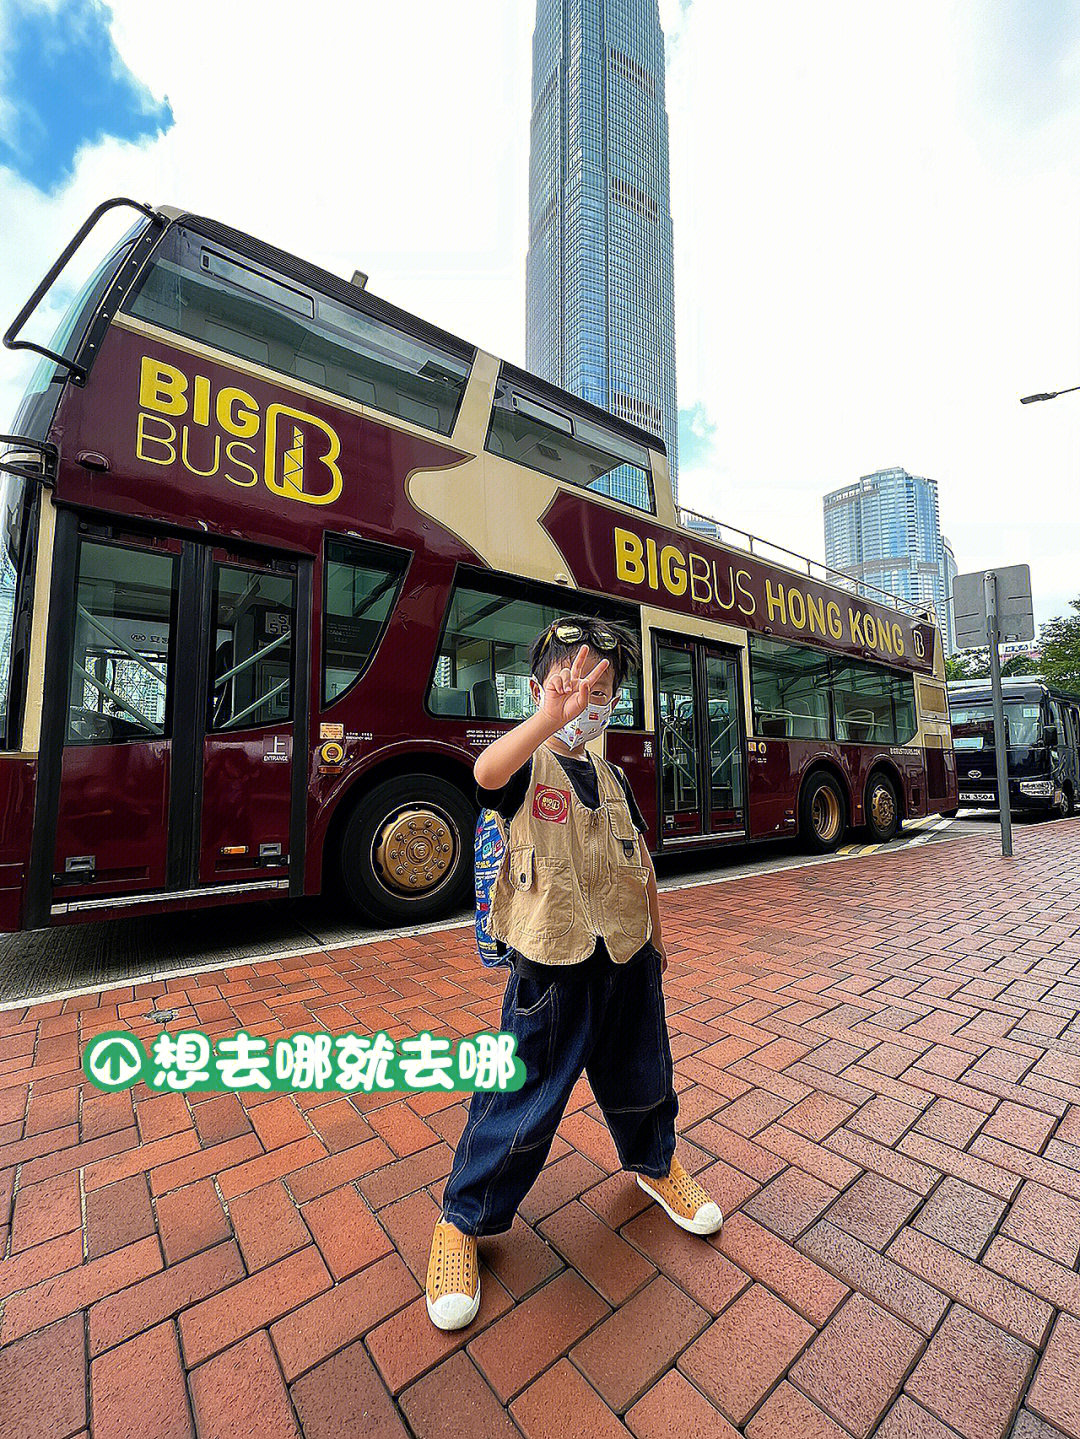 guided bus tour图片